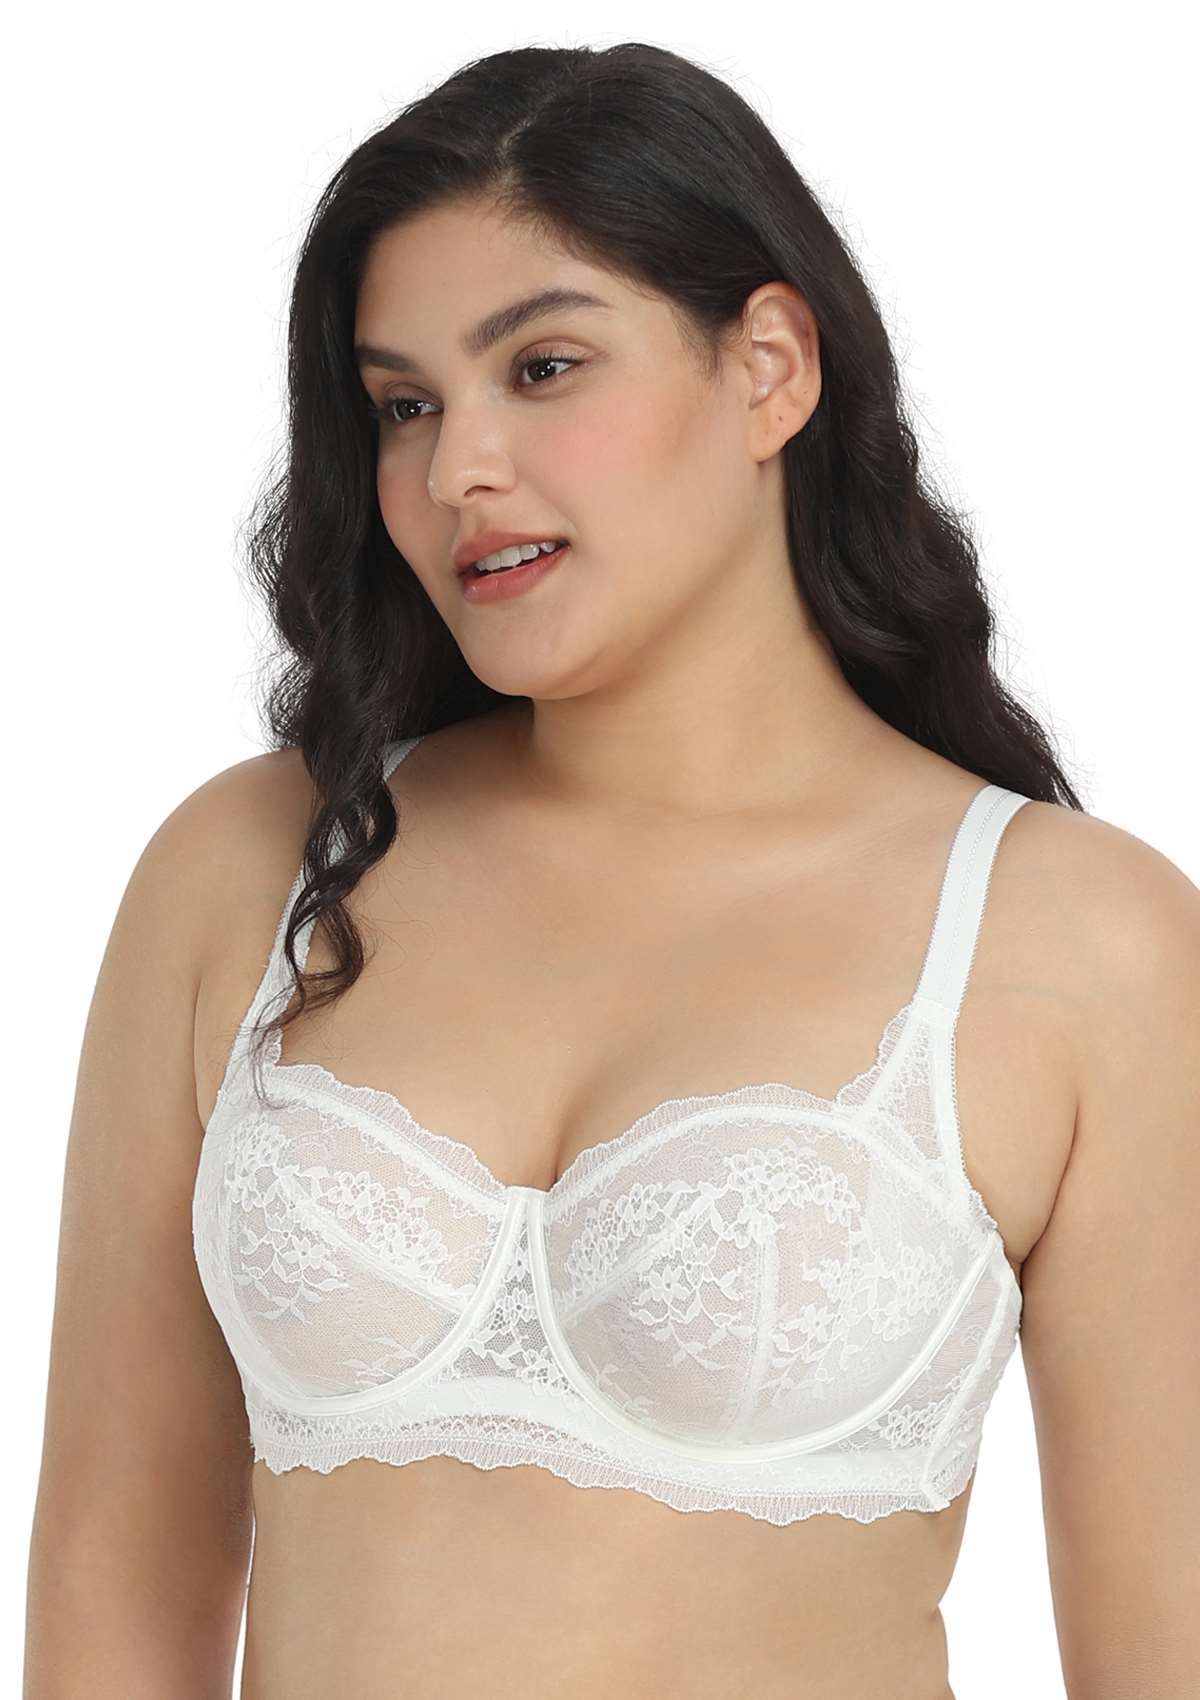 HSIA I Do Floral Lace Bridal Balconette Beautiful Bra For Special Day - Pink / 42 / DD/E